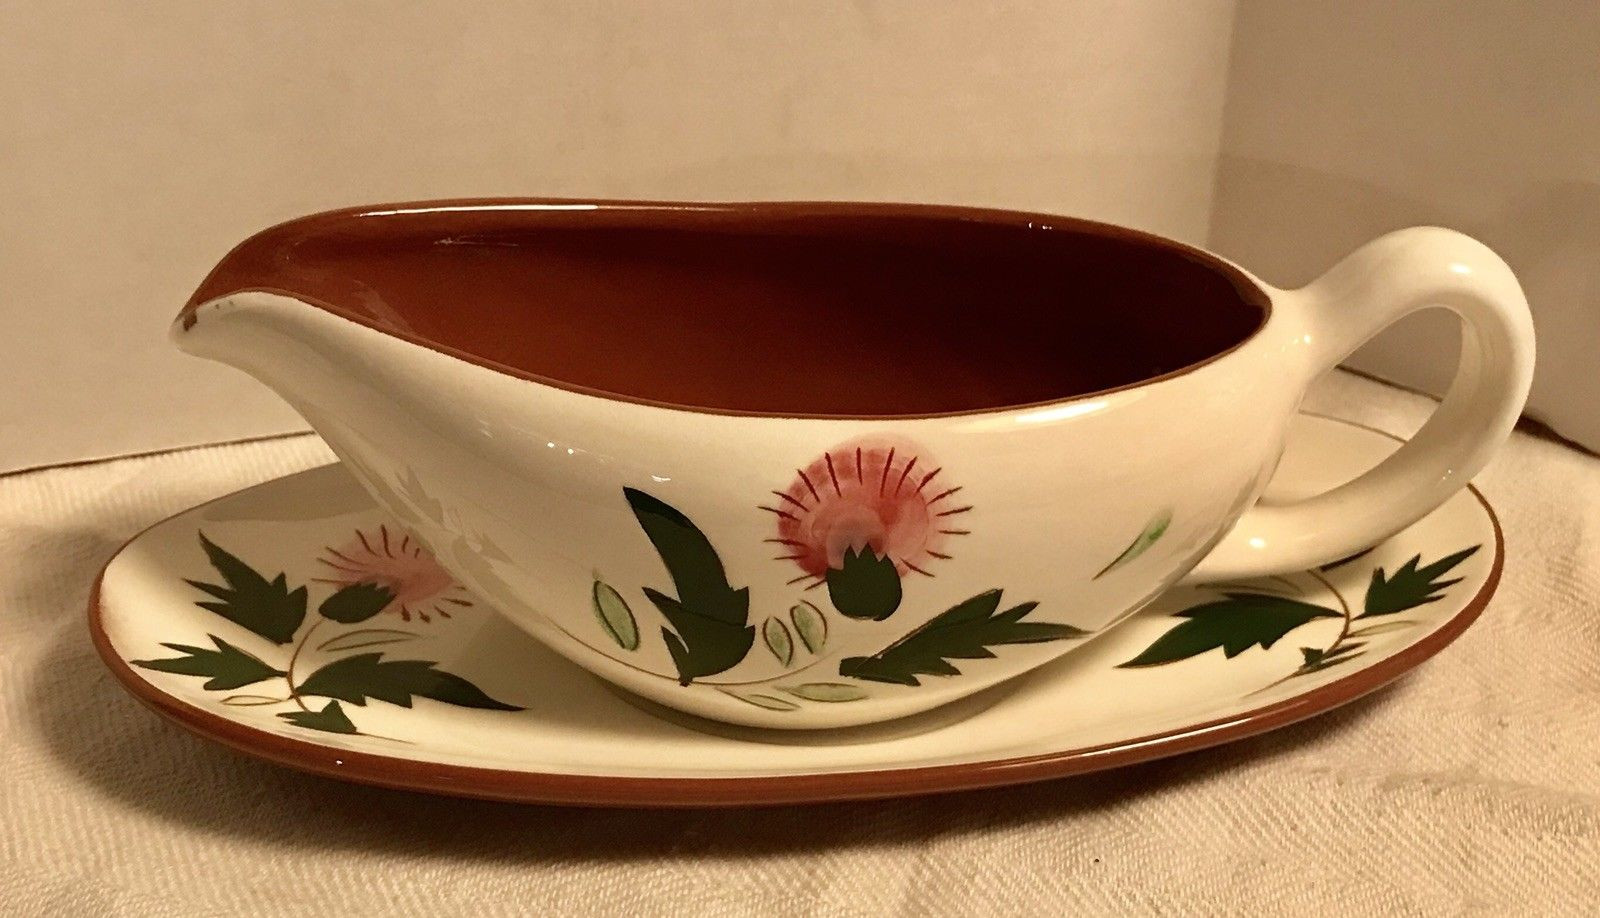 stangl pottery vase of stangl pottery hand painted thistle gravy dish tray 15 99 with regard to stangl pottery hand painted thistle gravy dish tray 1 of 3 stangl pottery